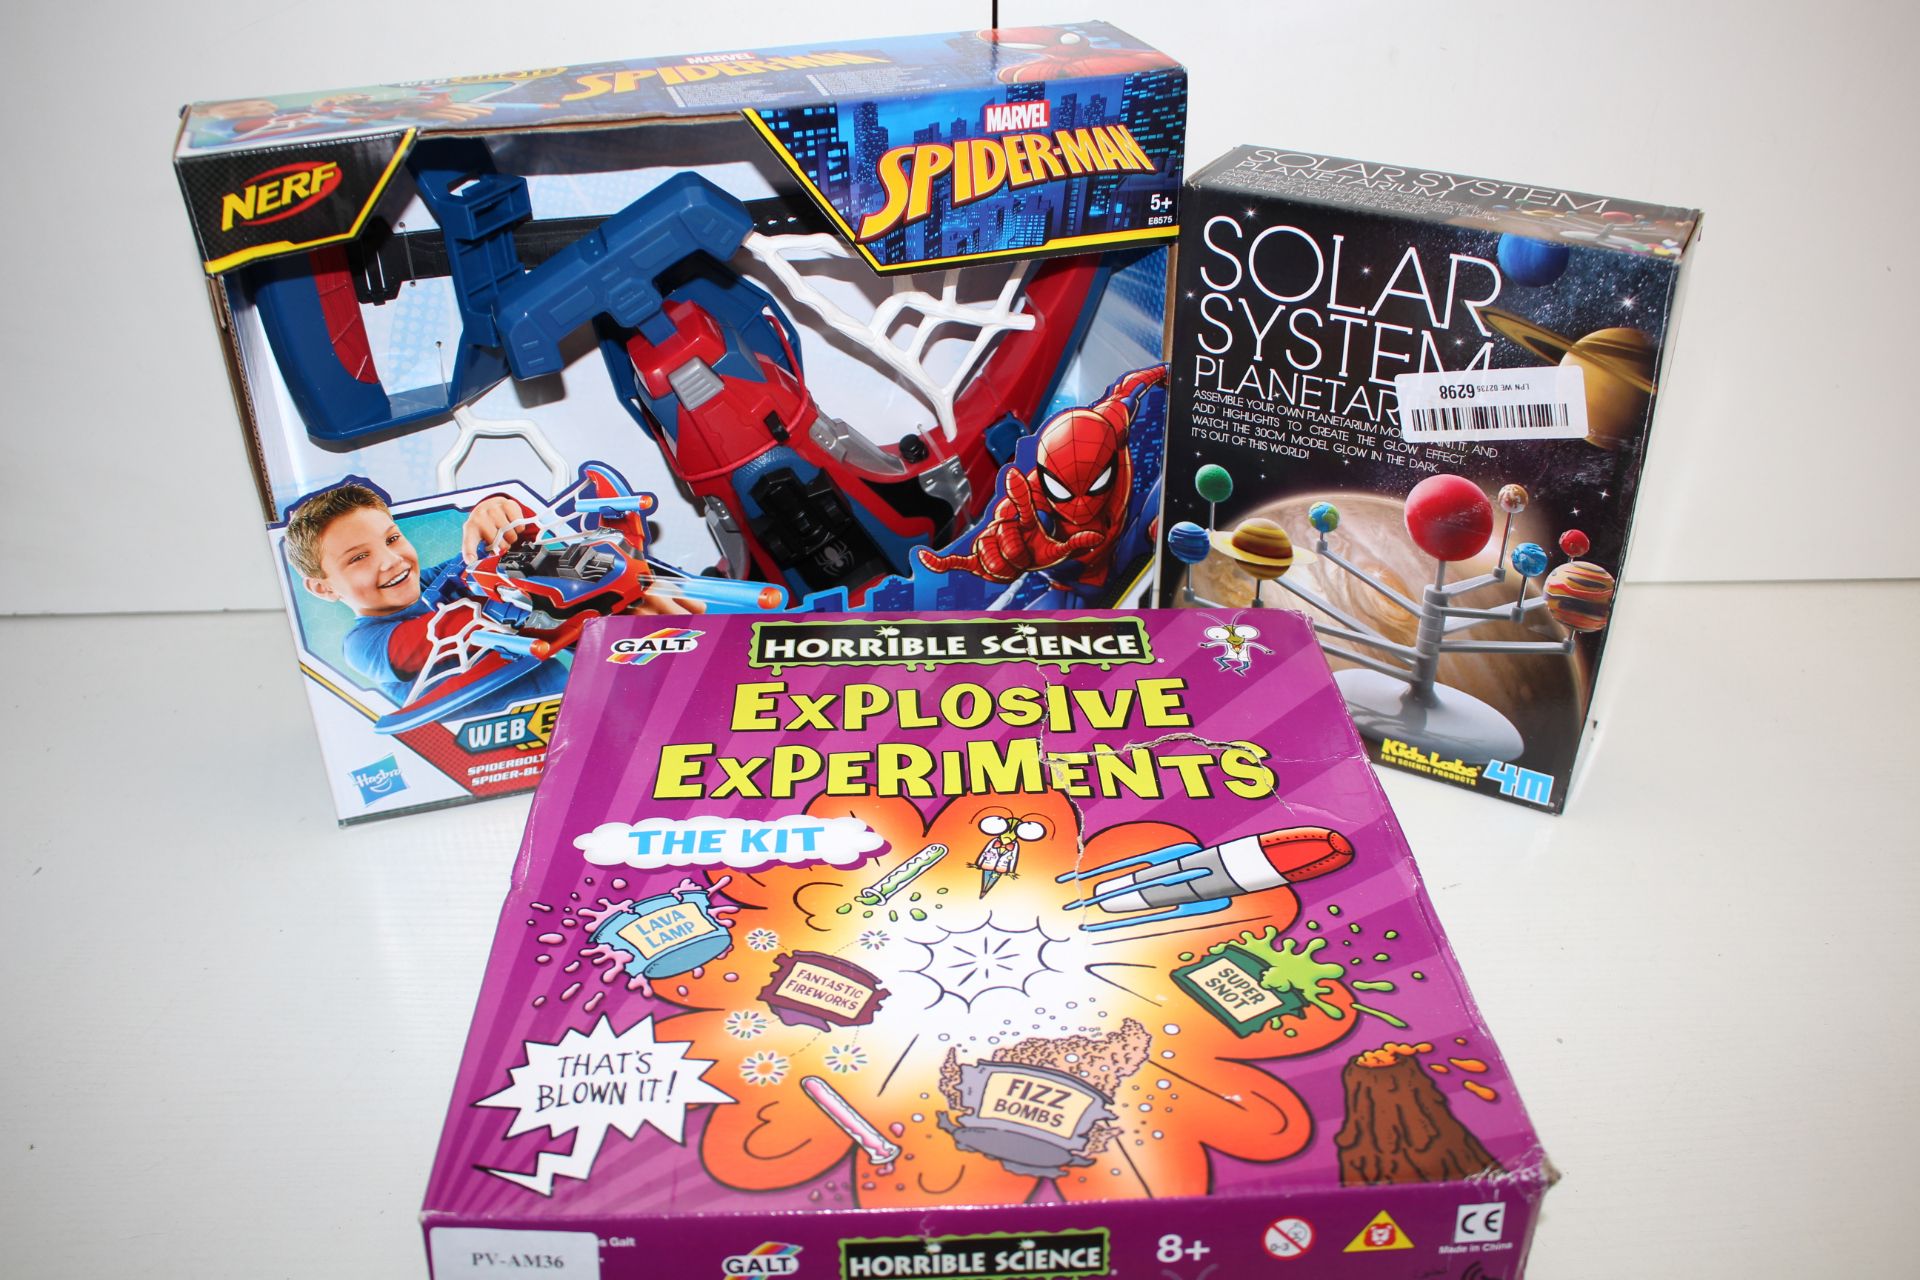 3X ASSORTED BOXED ITEMS TO INCLUDE SPIDER-MAN, HORRIBLE SCIENCE & SOLAR SYSTEM PLANETARIUM (IMAGE